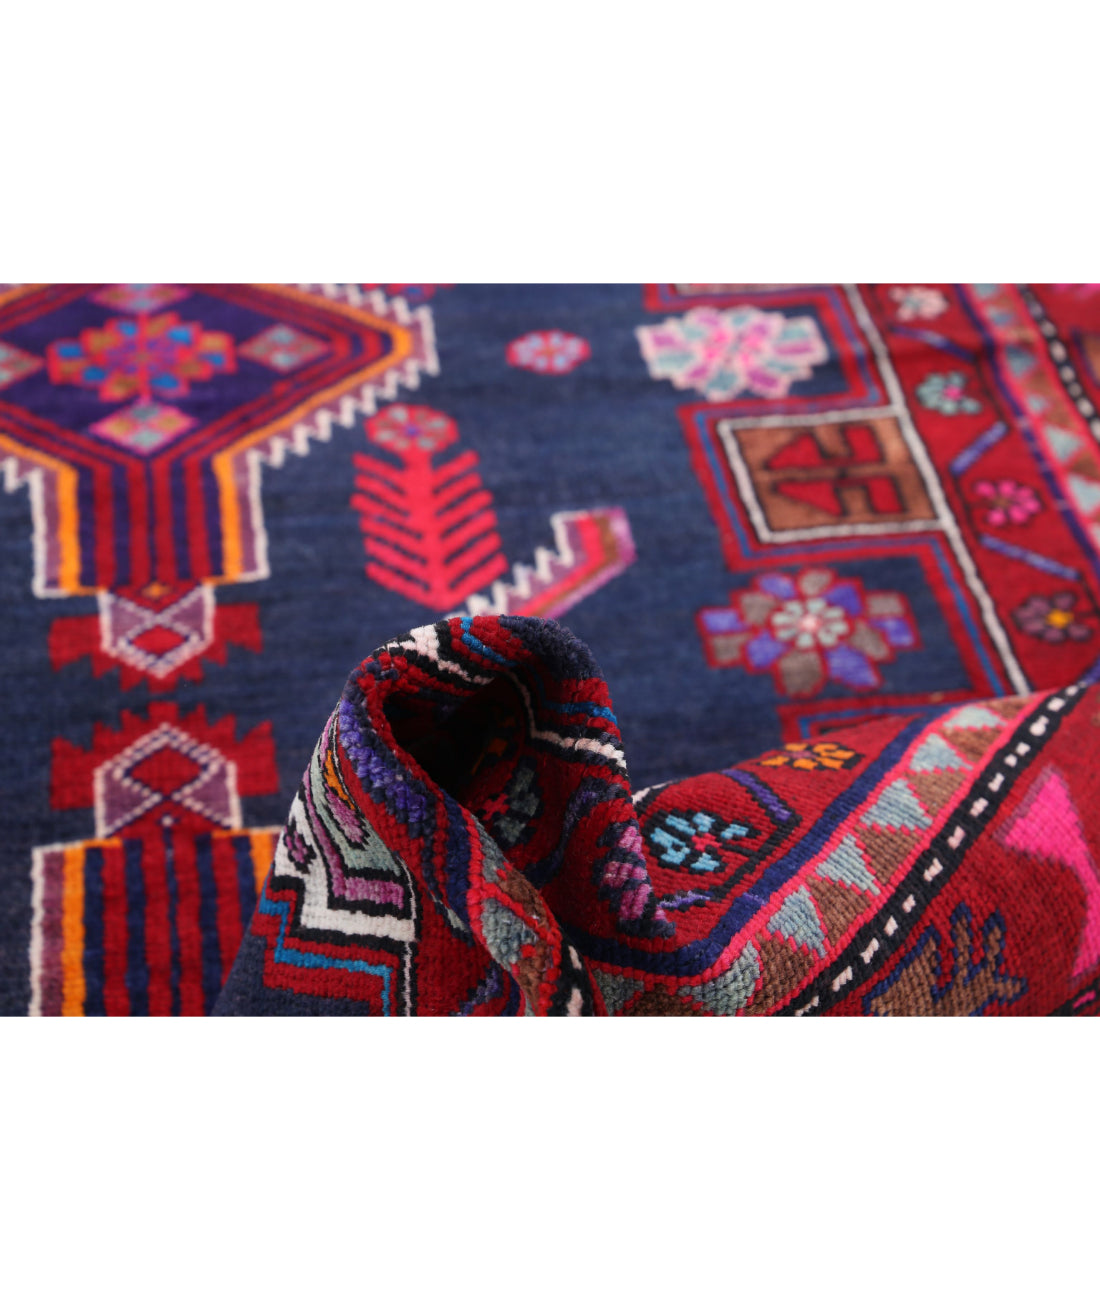 Hand Knotted Persian Hamadan Wool Rug - 4'10'' x 8'10'' 4'10'' x 8'10'' (145 X 265) / Blue / Red